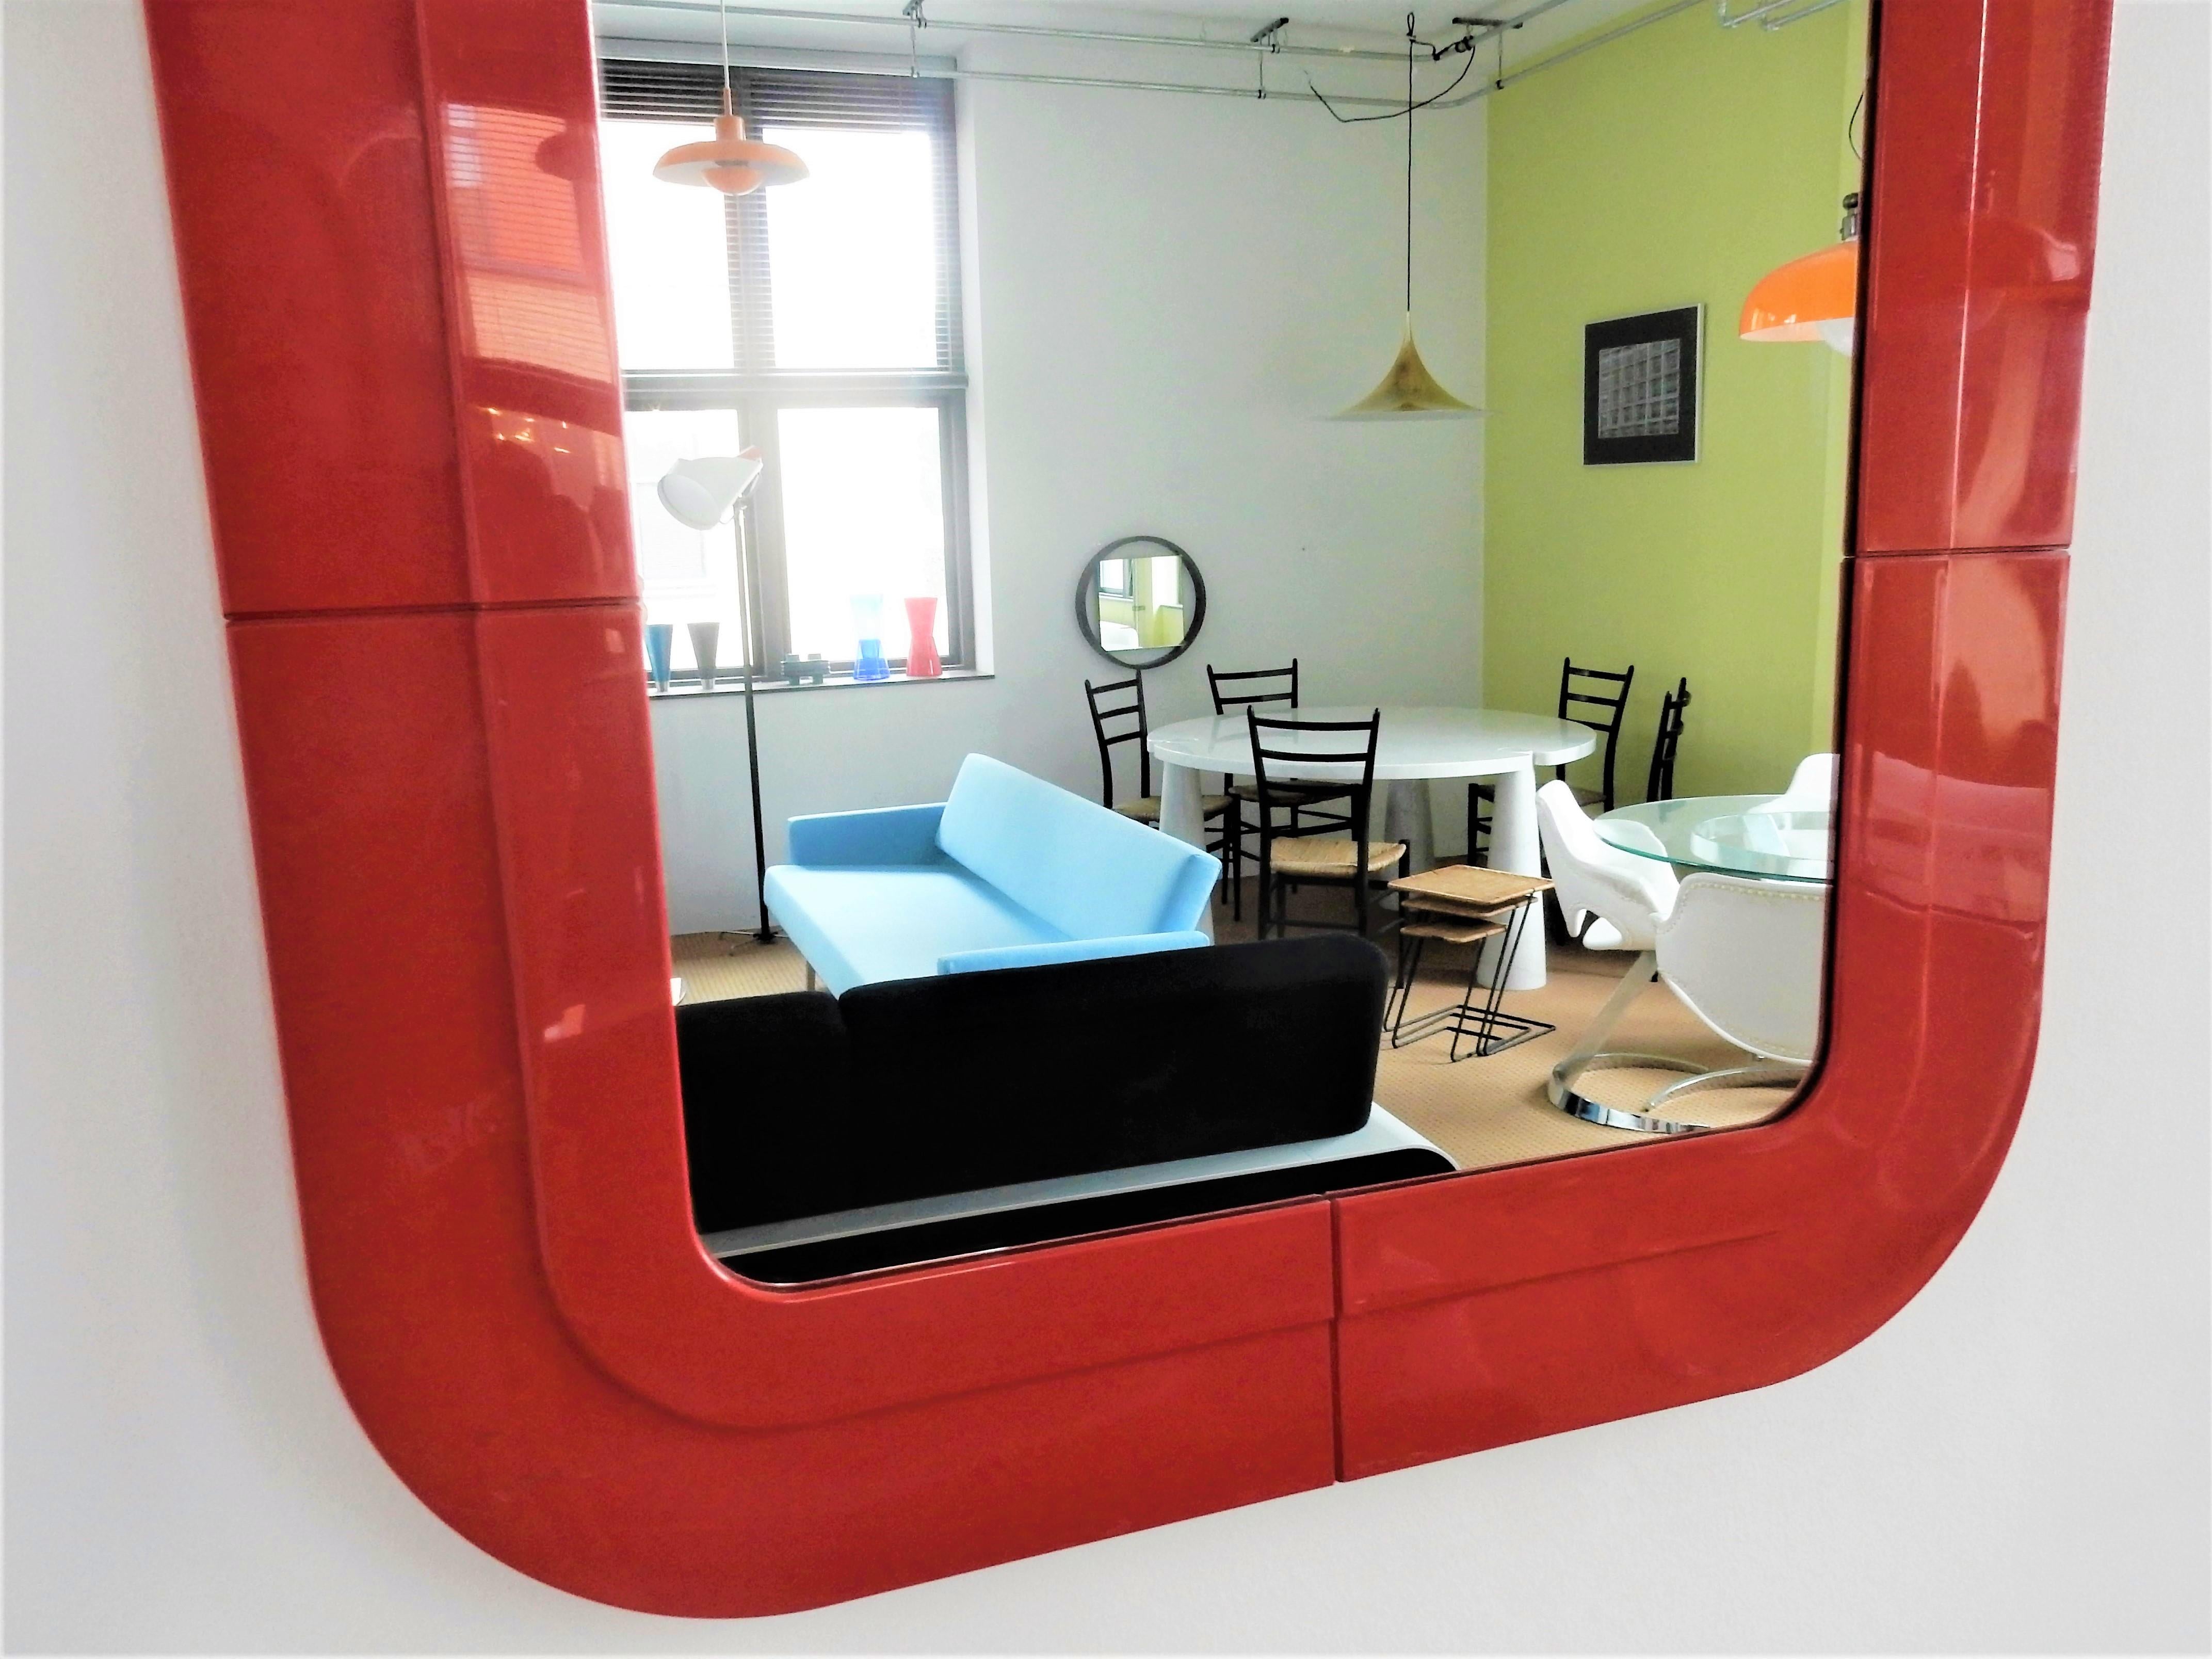 This very nice moulded red plastic frame mirror with is designed by the Italian designer Anna Castelli Ferrieri and manufactured by Kartell in the 1960s-1970s. A model not often seen, particularly in this bright red color. The mirror is marked at